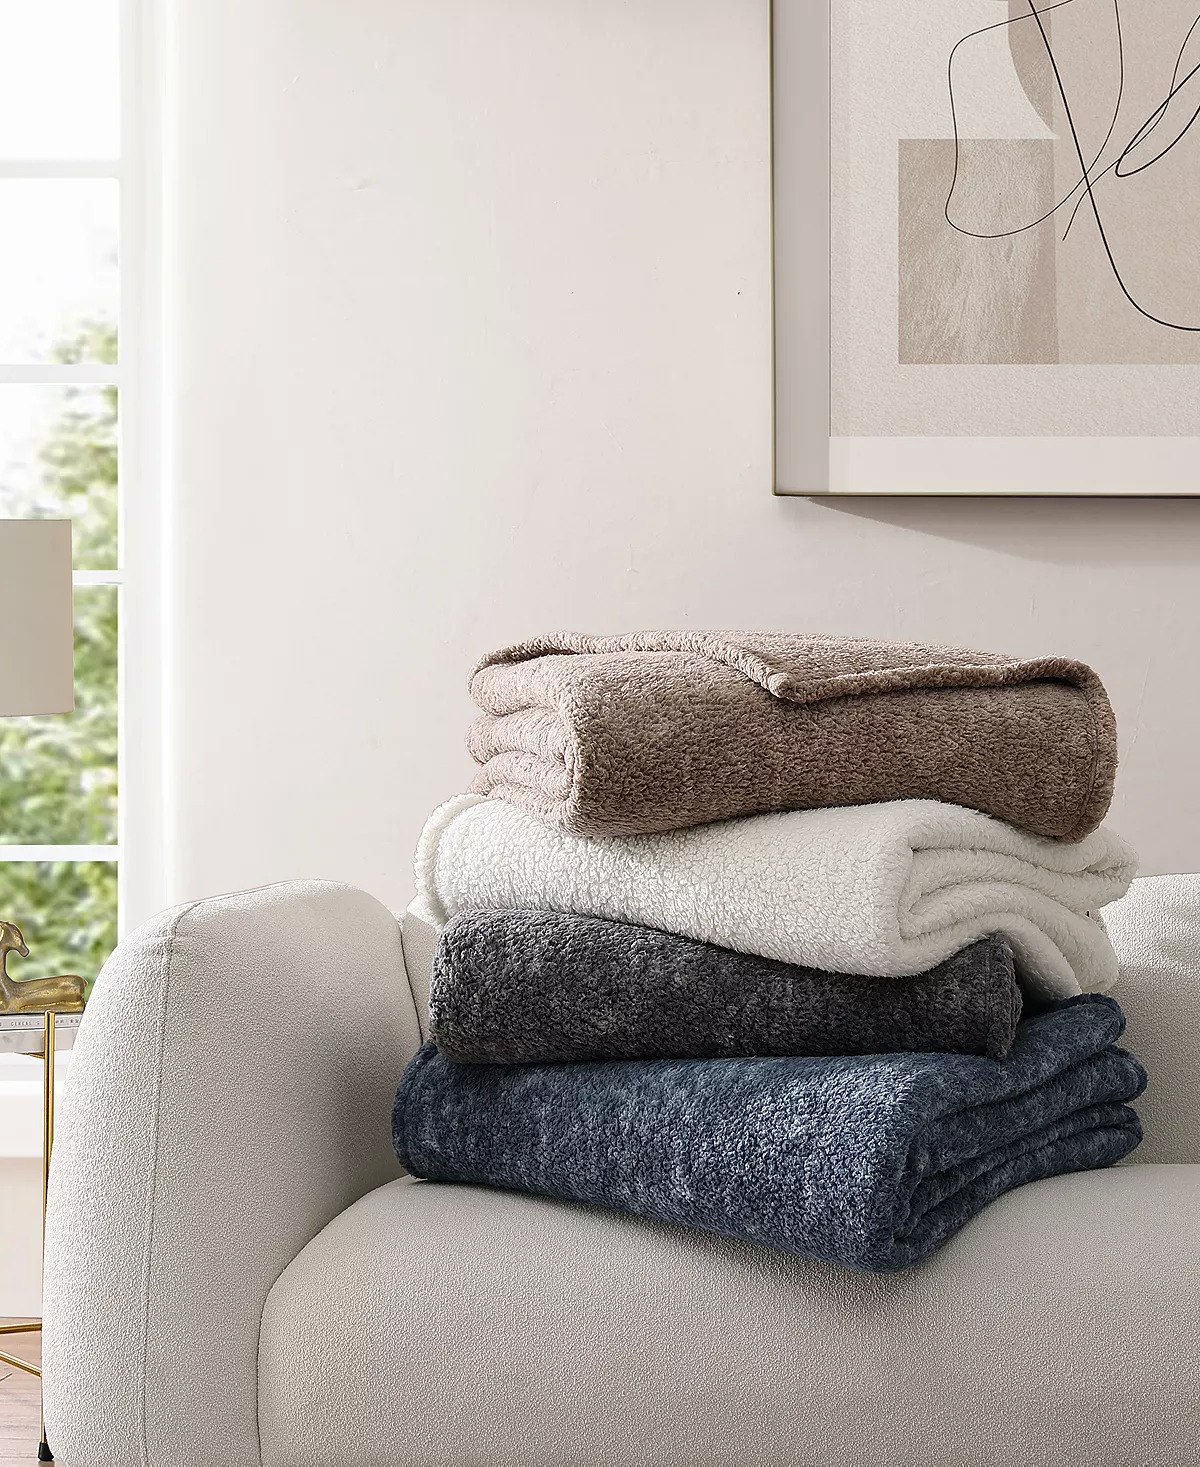 Royal Luxe Ultra Soft Sherpa Blanket (Twin, Full/Queen, King, 4 Colors) $21.24 + Free Store Pickup at Macy's or F/S on $25+